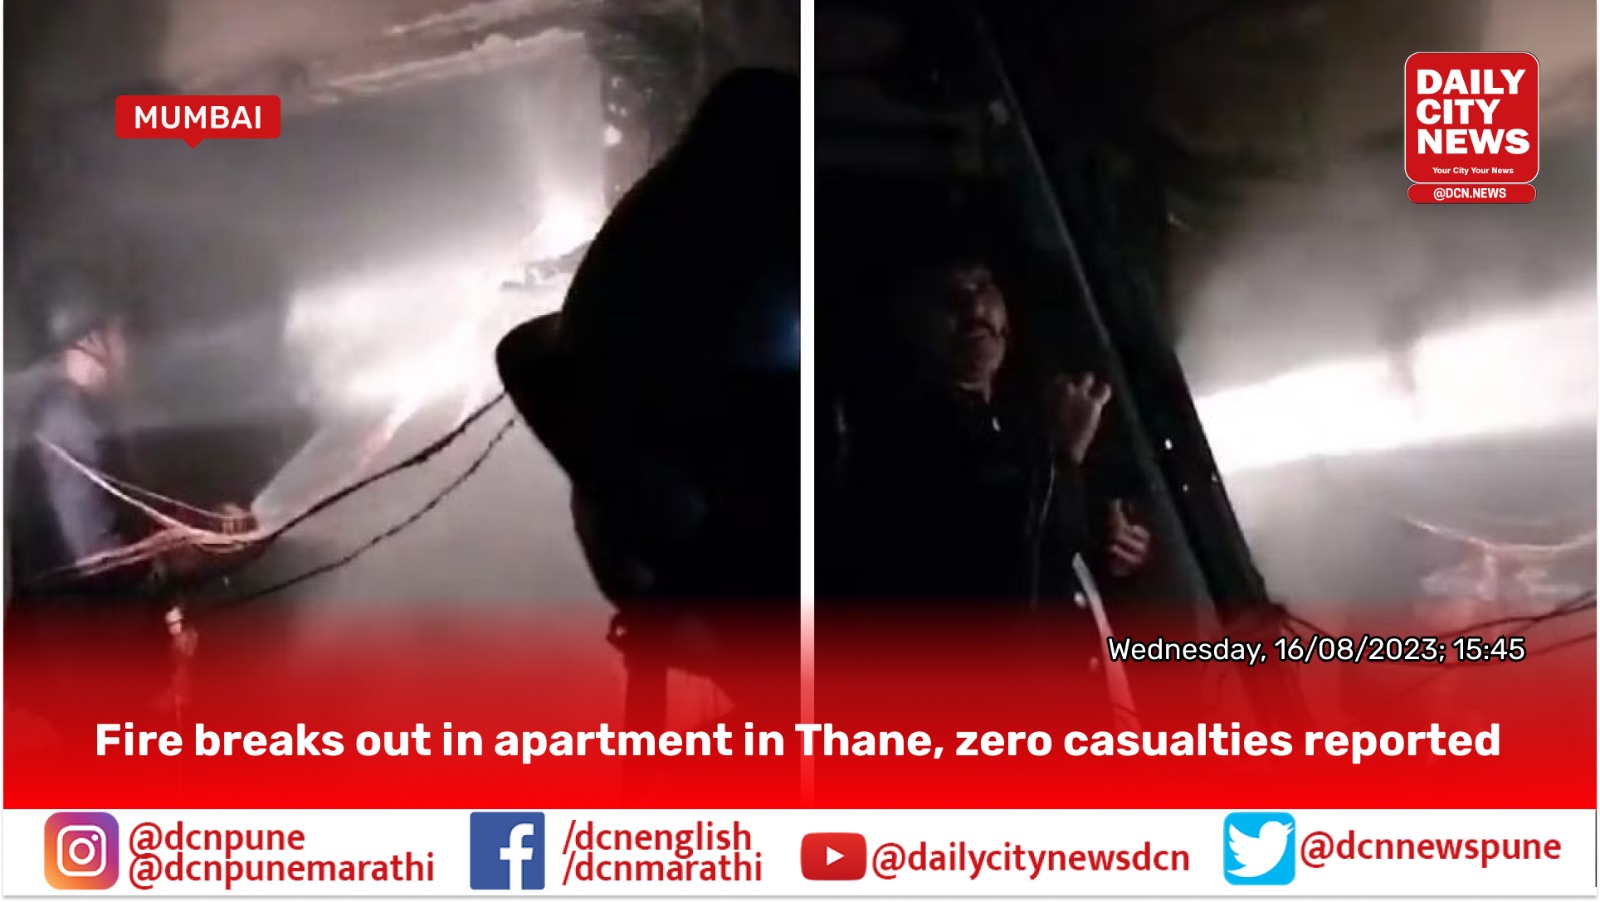 Fire breaks out in apartment in Thane, zero casualties reported